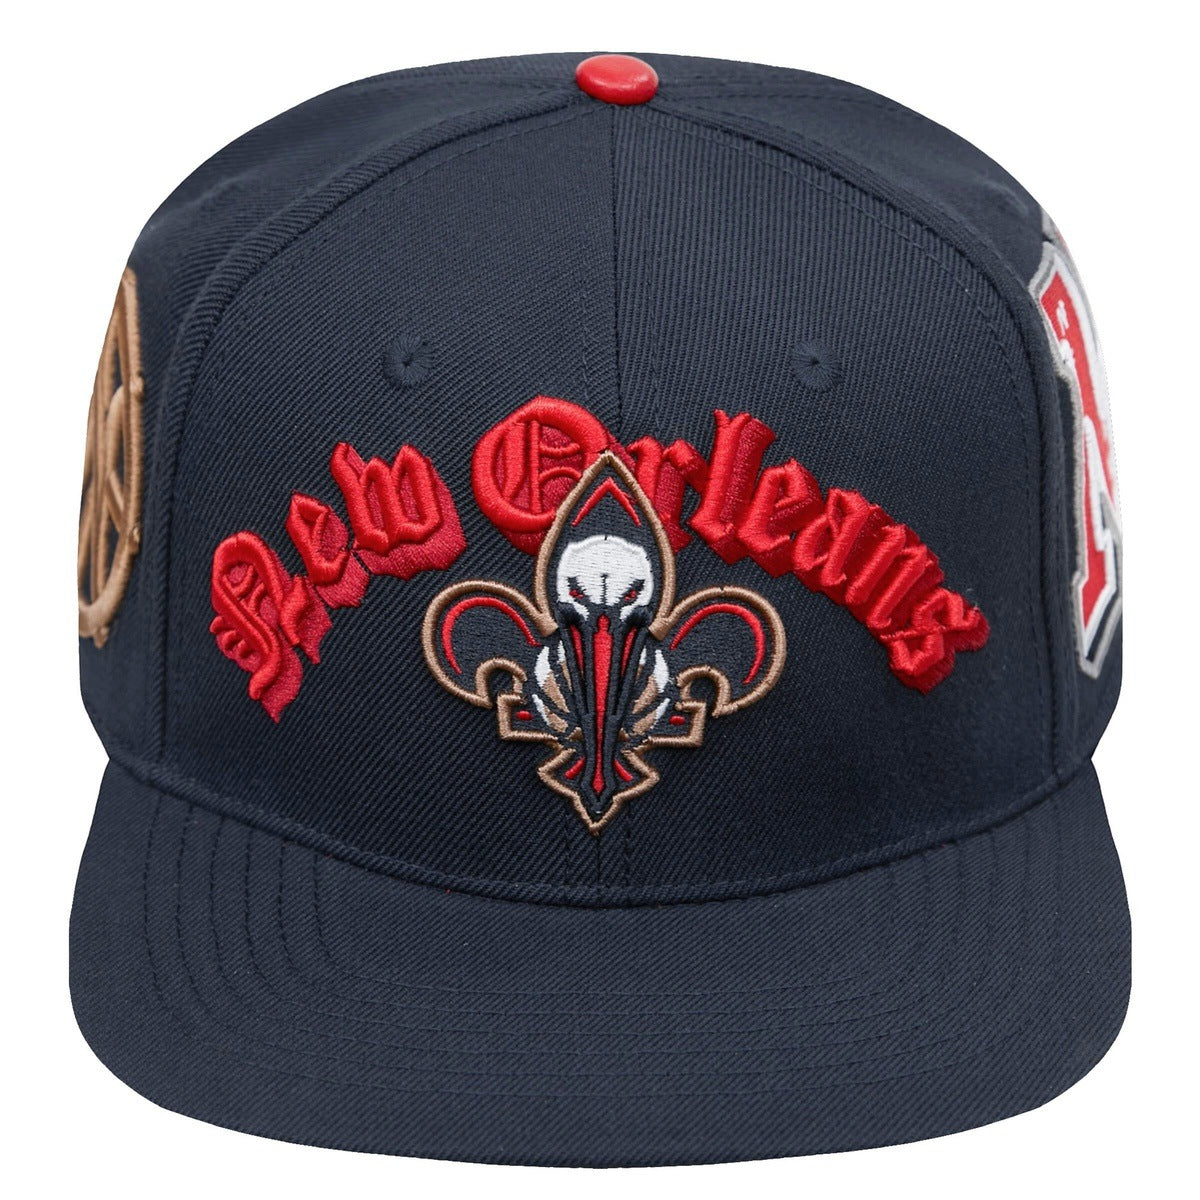 NEW ORLEANS PELICANS OLD ENGLISH WOOL SNAPBACK HAT (MIDNIGHT NAVY)